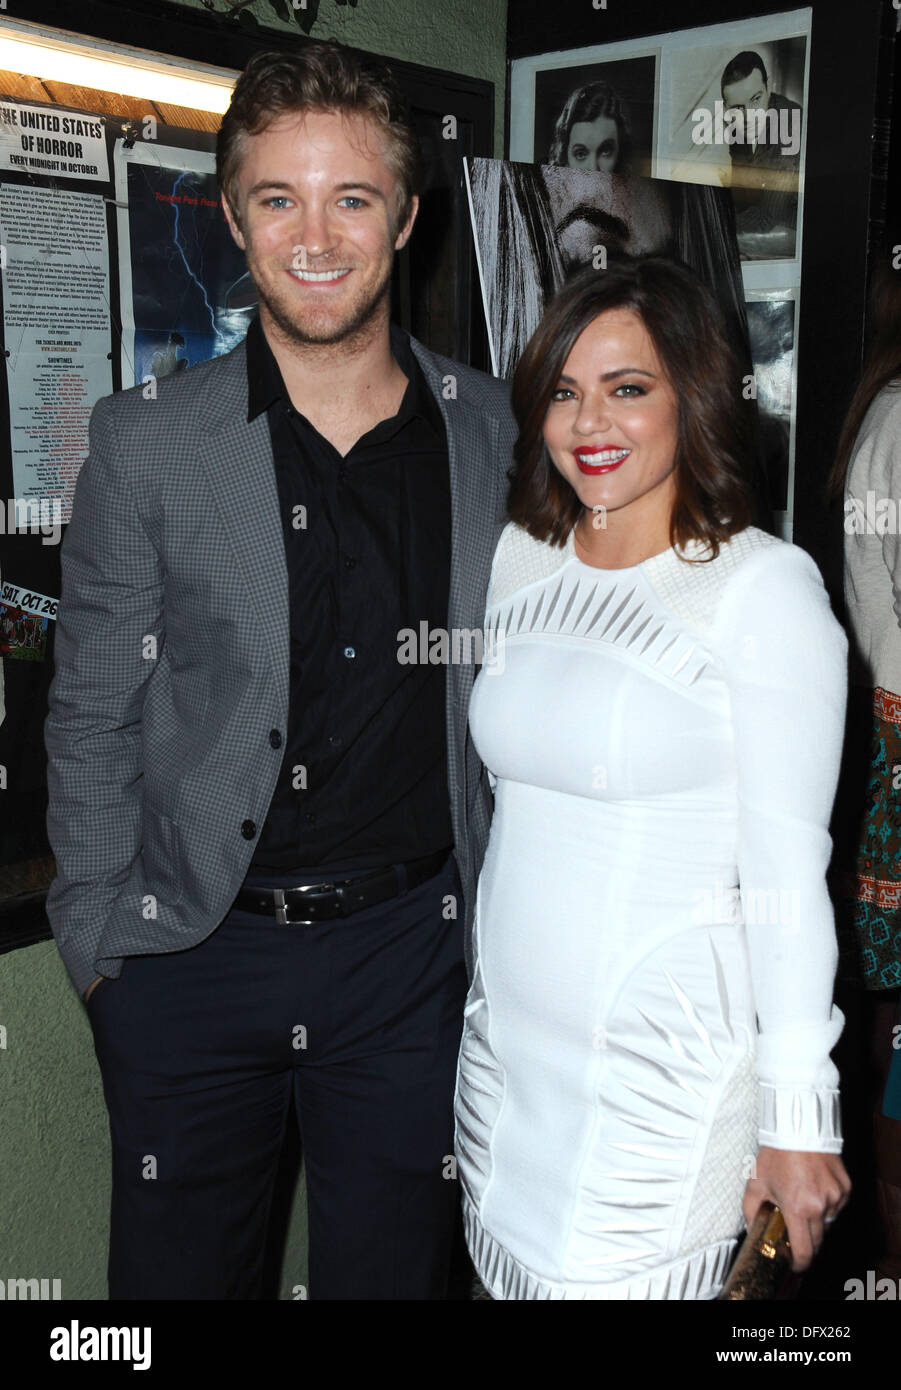 Los Angeles, California, USA. 9th Oct, 2013. Michael Welch, Melissa Price  attending the Los Angeles Premiere of ''All The Boys Love Mandy Lane'' held  at The Cinefamily in Los Angeles, California on